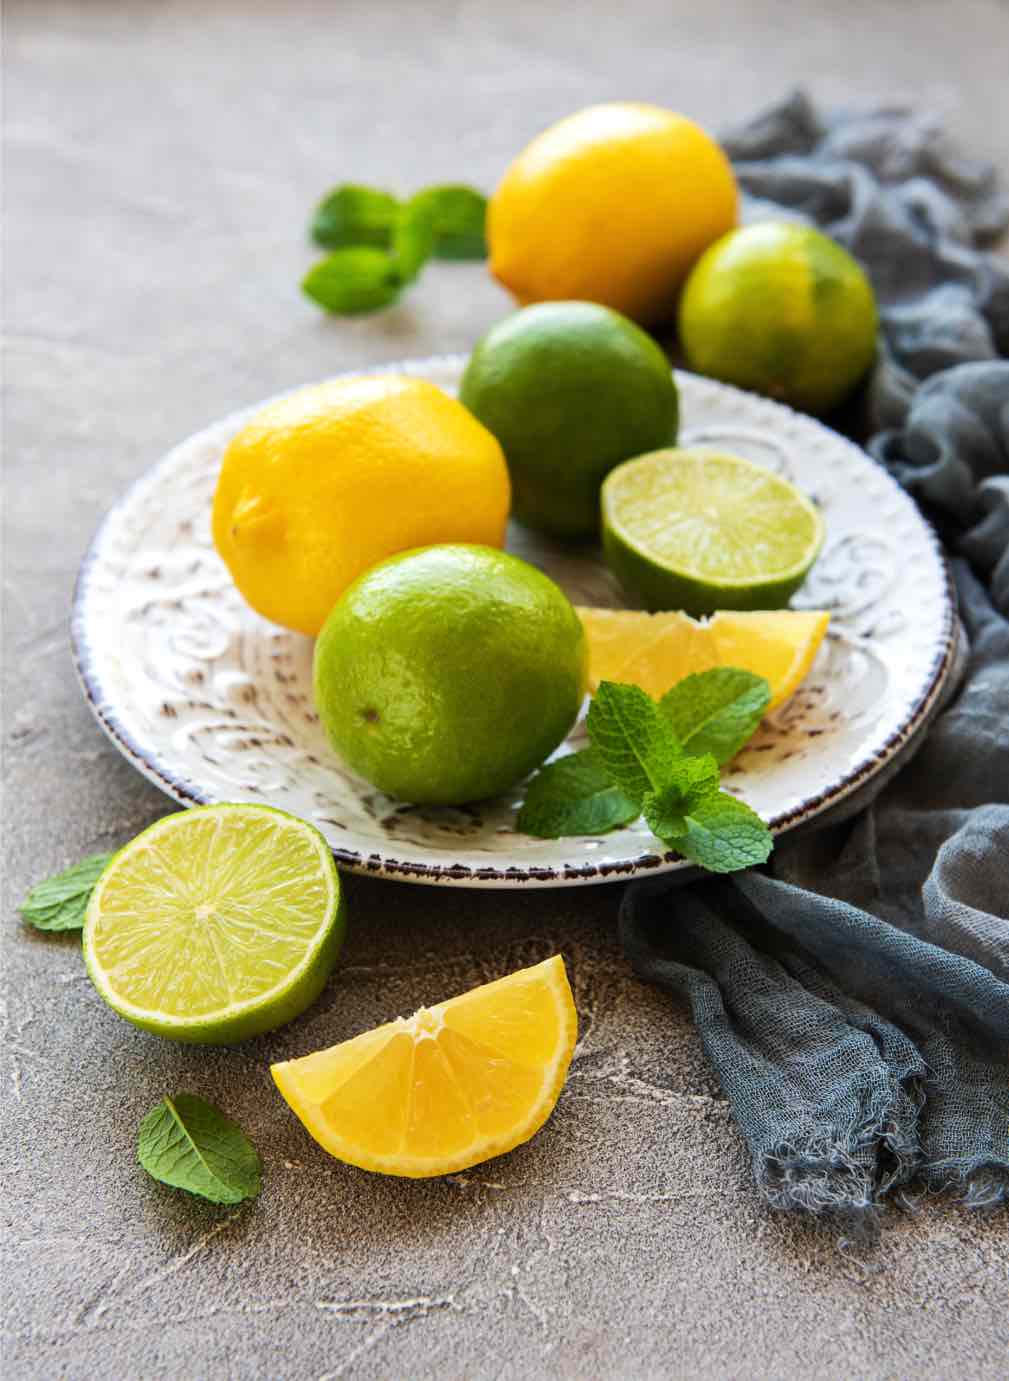 Lemons and limes are great for humans, but not for dogs - learn more with Dog Training Elite New Mexico in Albuquerque / Santa Fe!